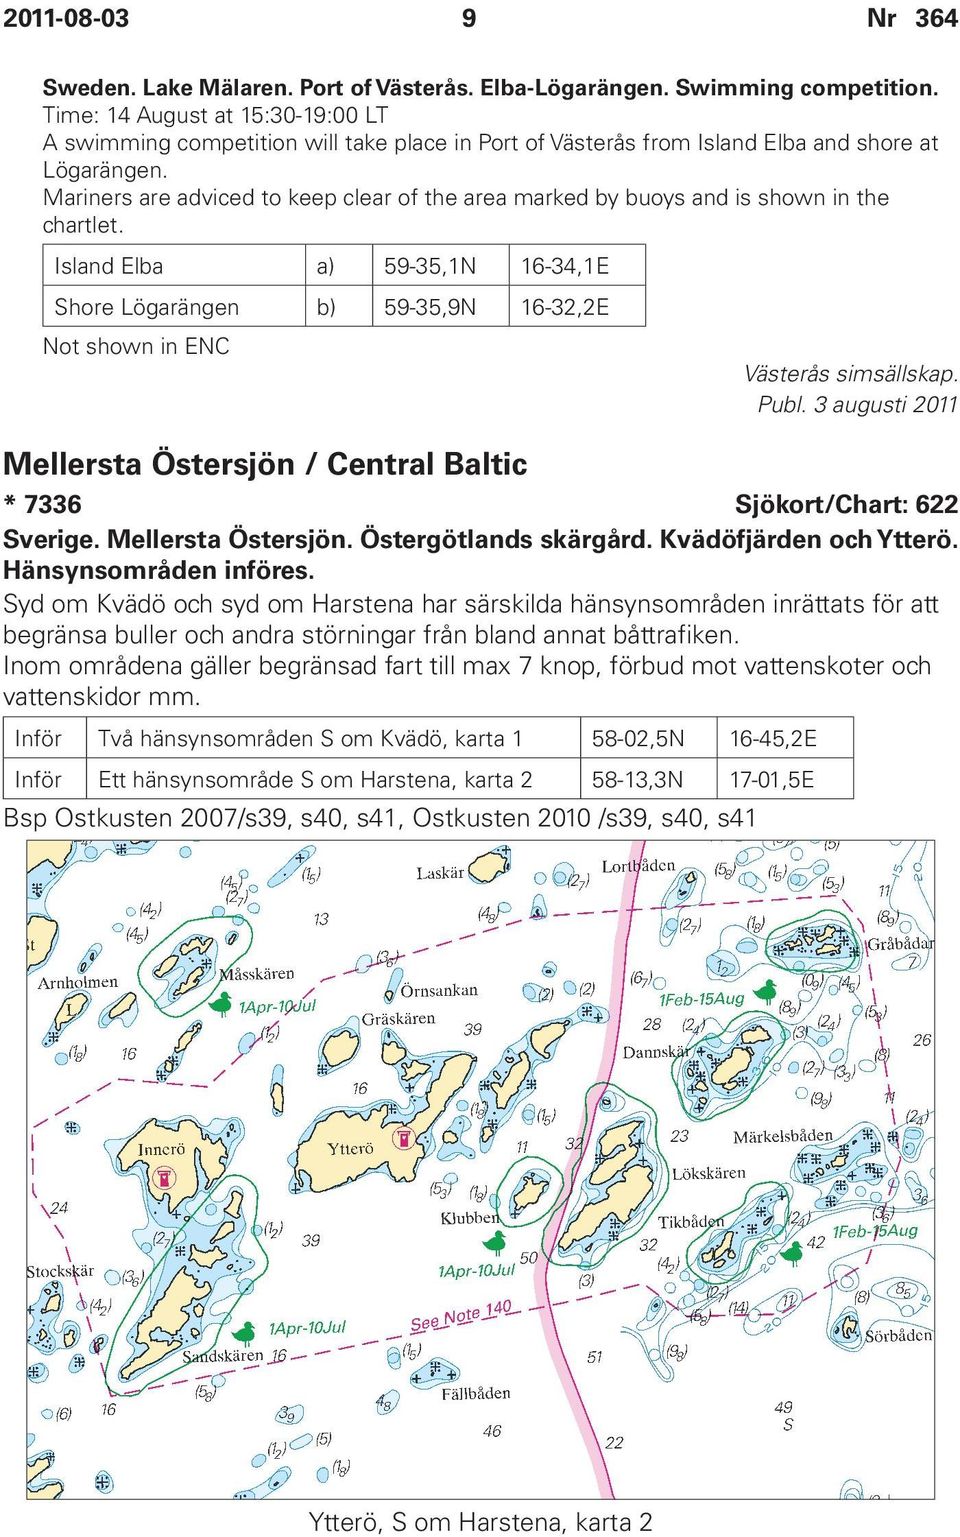 Mariners are adviced to keep clear of the area marked by buoys and is shown in the chartlet.